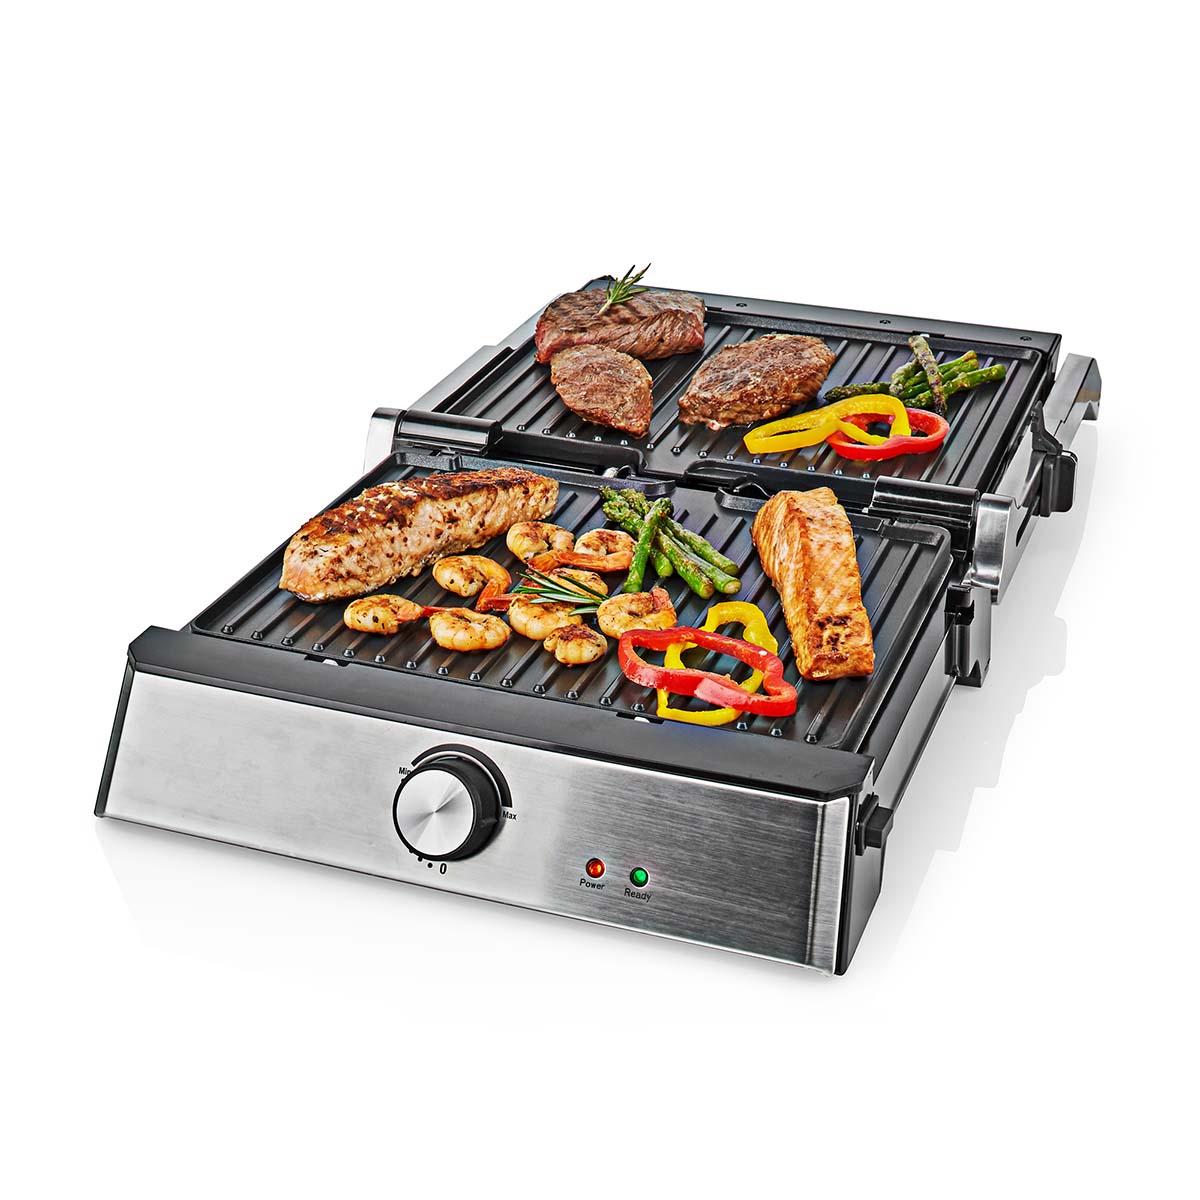 Grill CECOTEC Rock'nGrill Pro